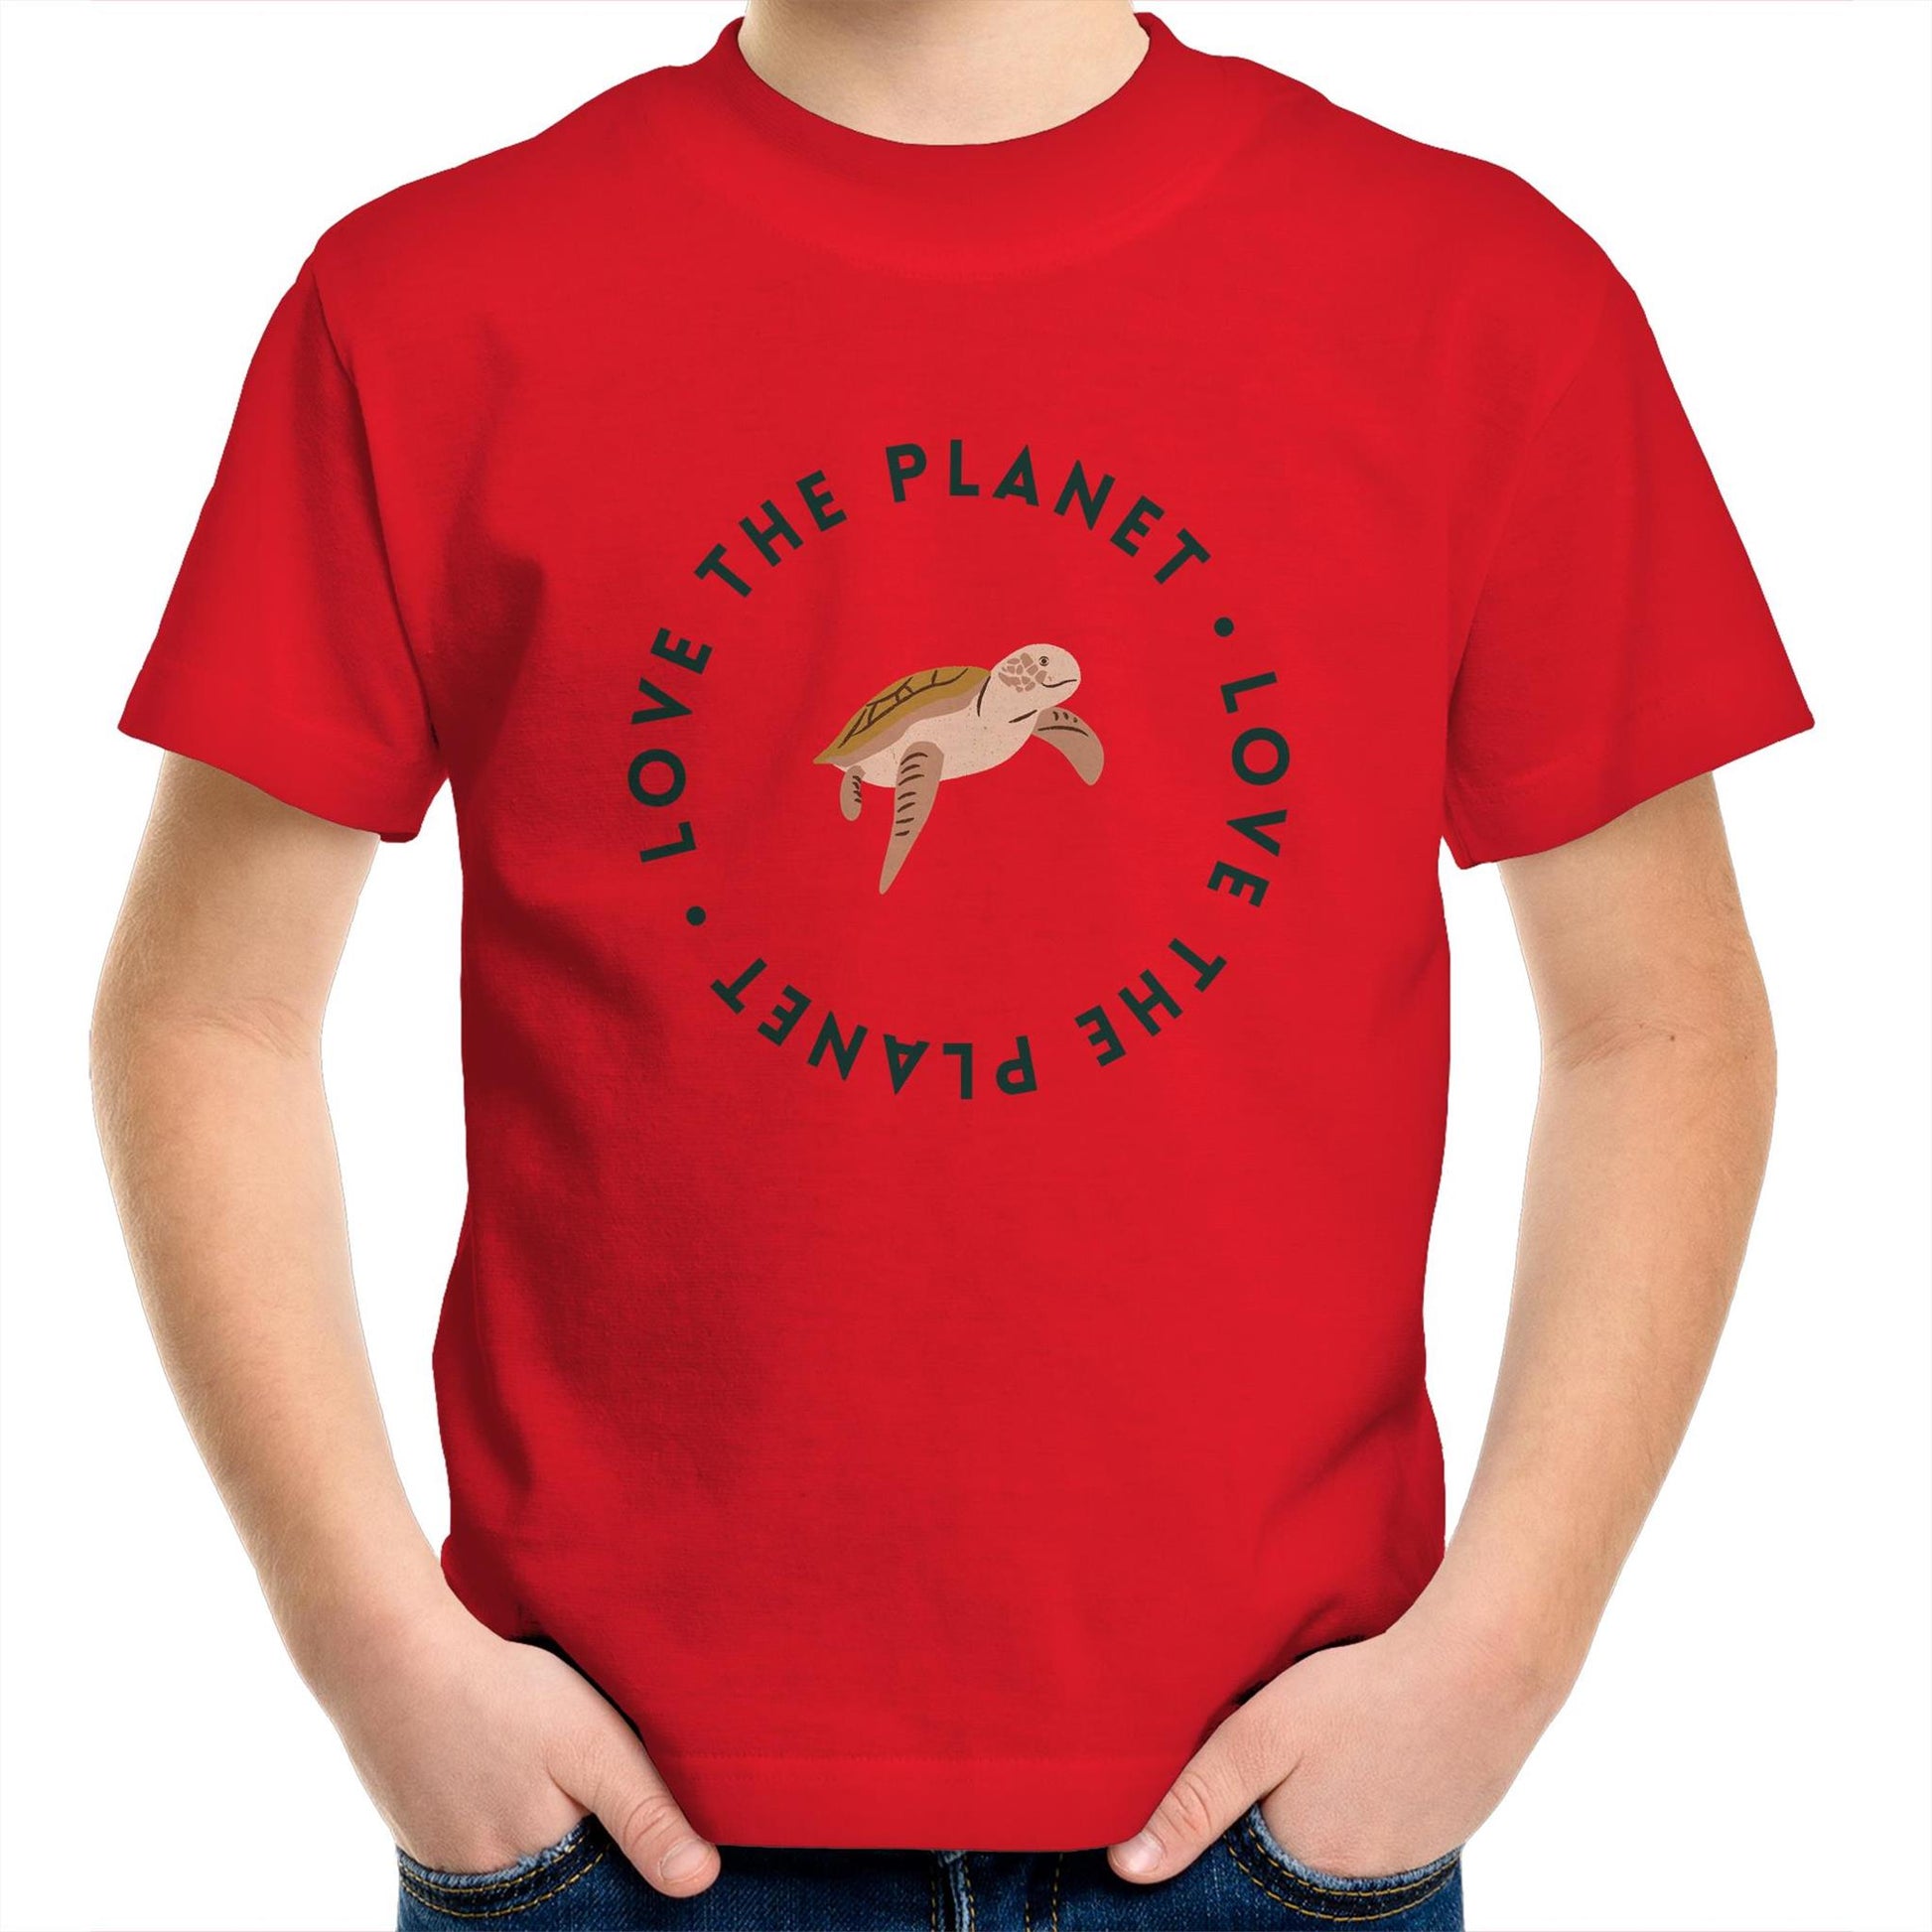 Love The Planet - Kids Youth Crew T-Shirt Red Kids Youth T-shirt animal Environment